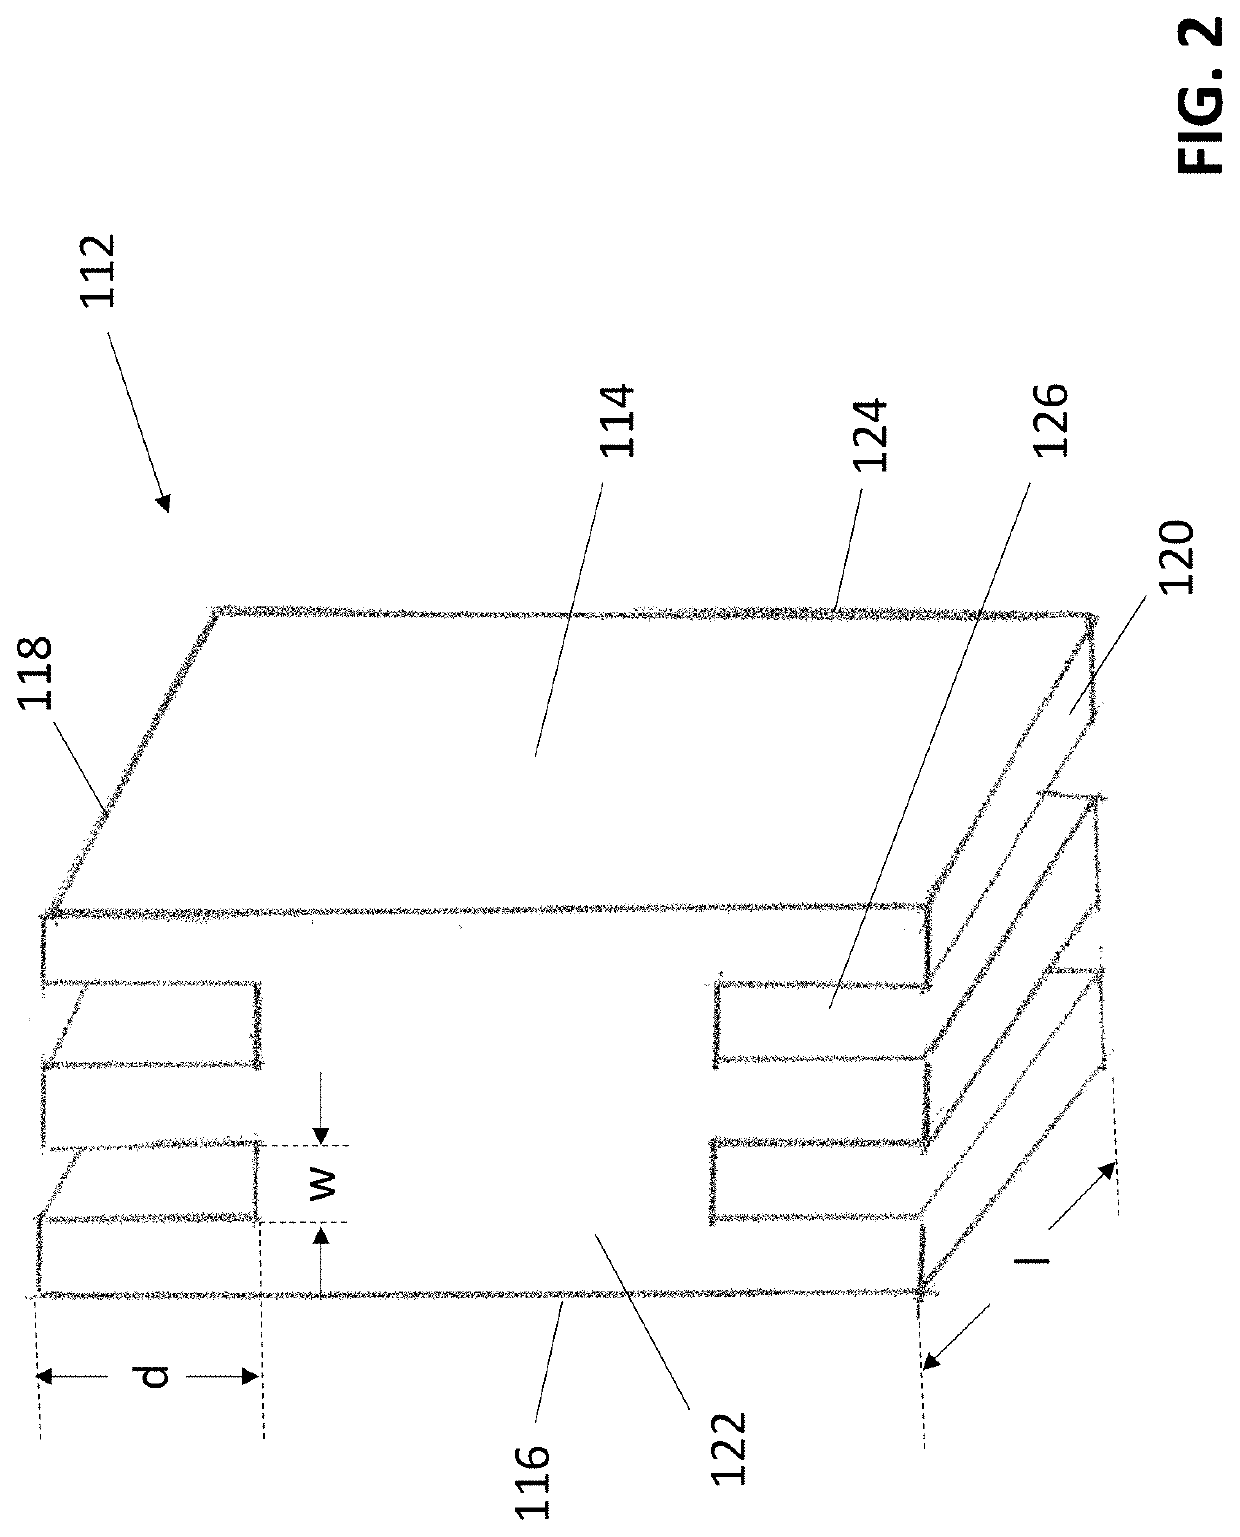 Doors and methods for reducing telegraphing therefor